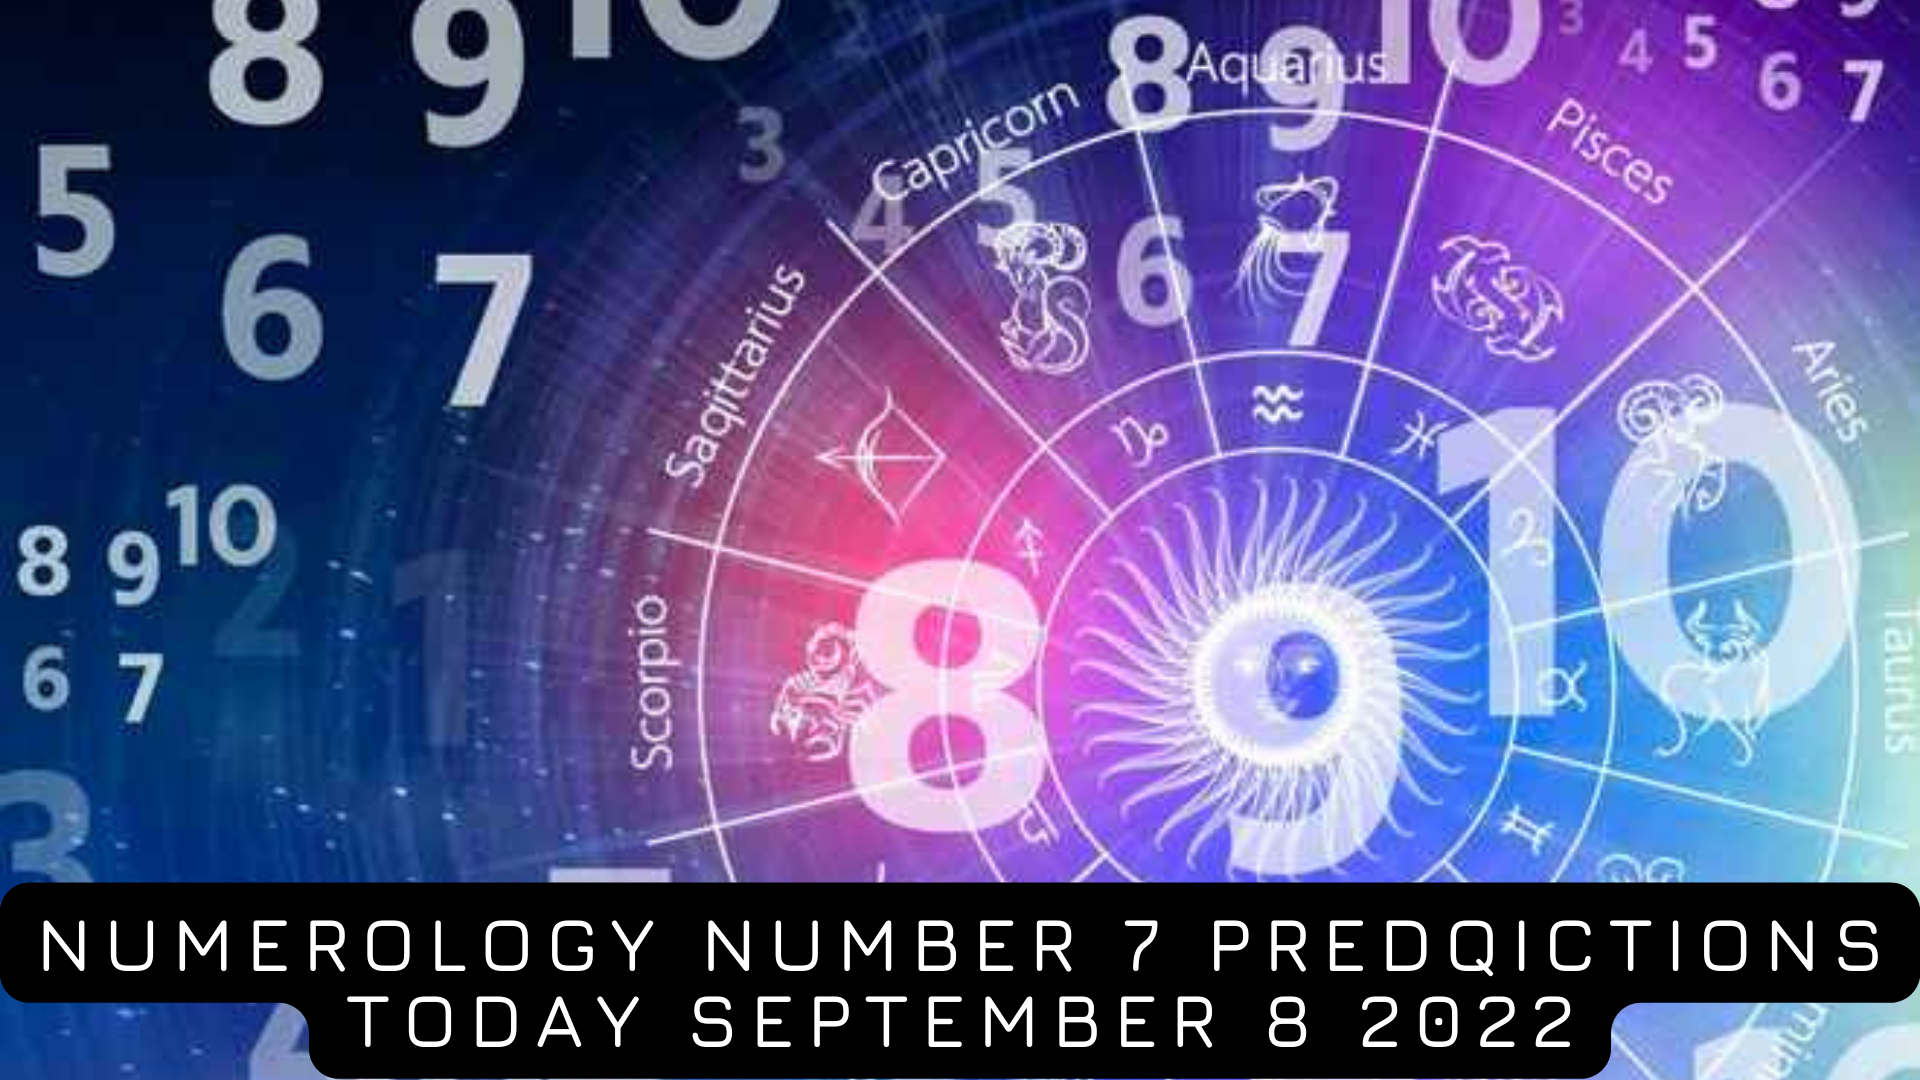 Numerology Number 7 Predictions Today September 8 2022 Pay Attention To Your Health